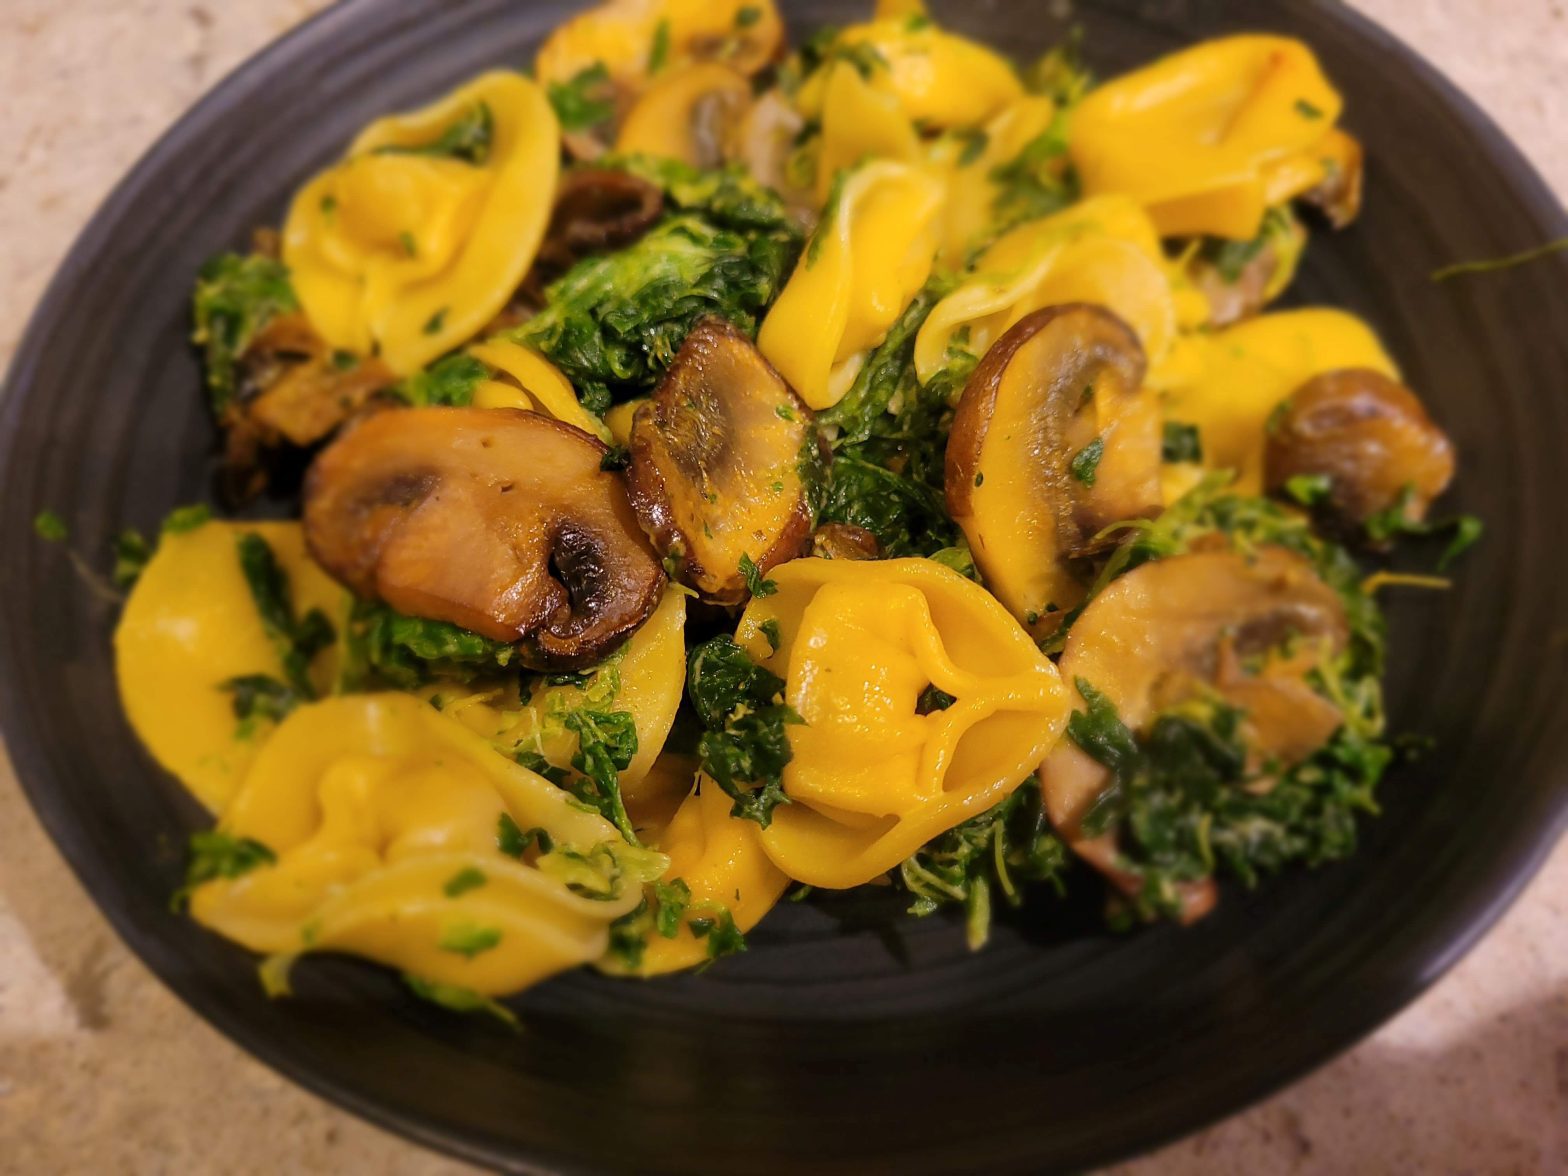 A bowl of pasta with mushrooms and broccoli.